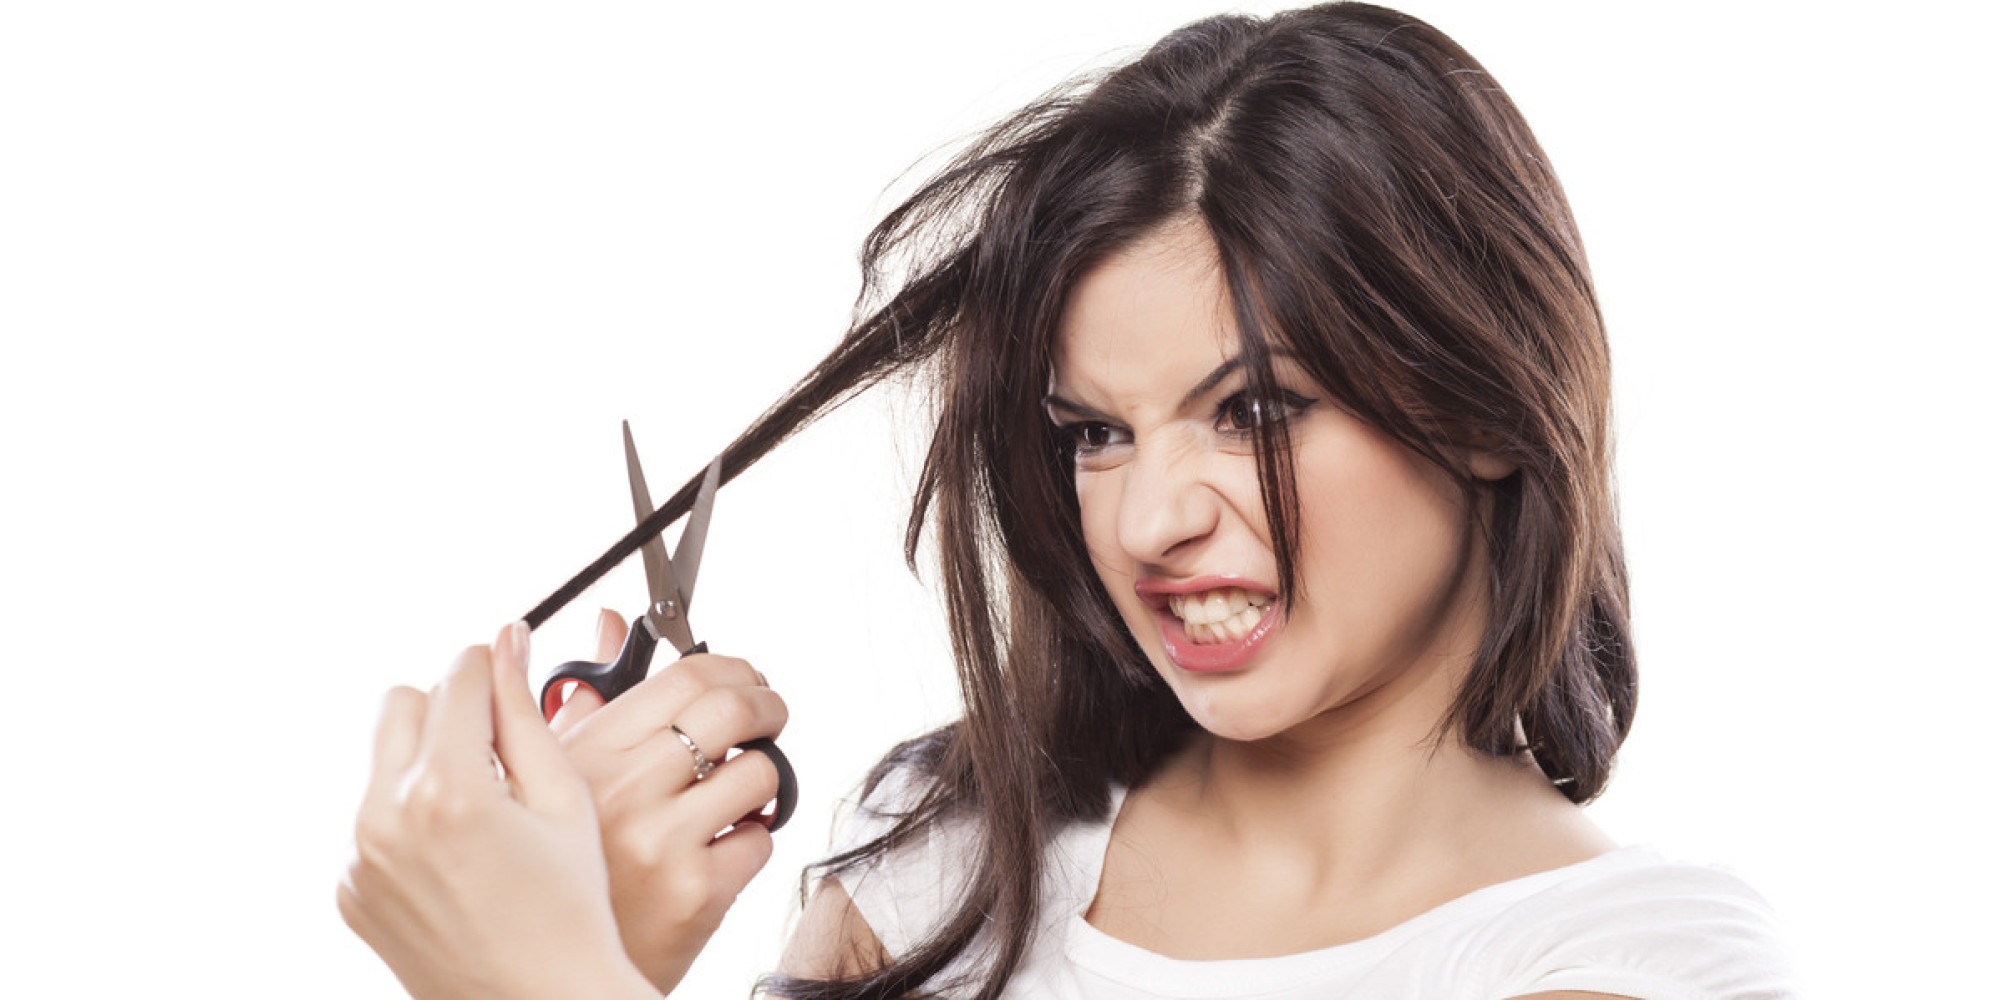 19 People Who Shouldn't Be Allowed To Cut Their Own Hair | HuffPost